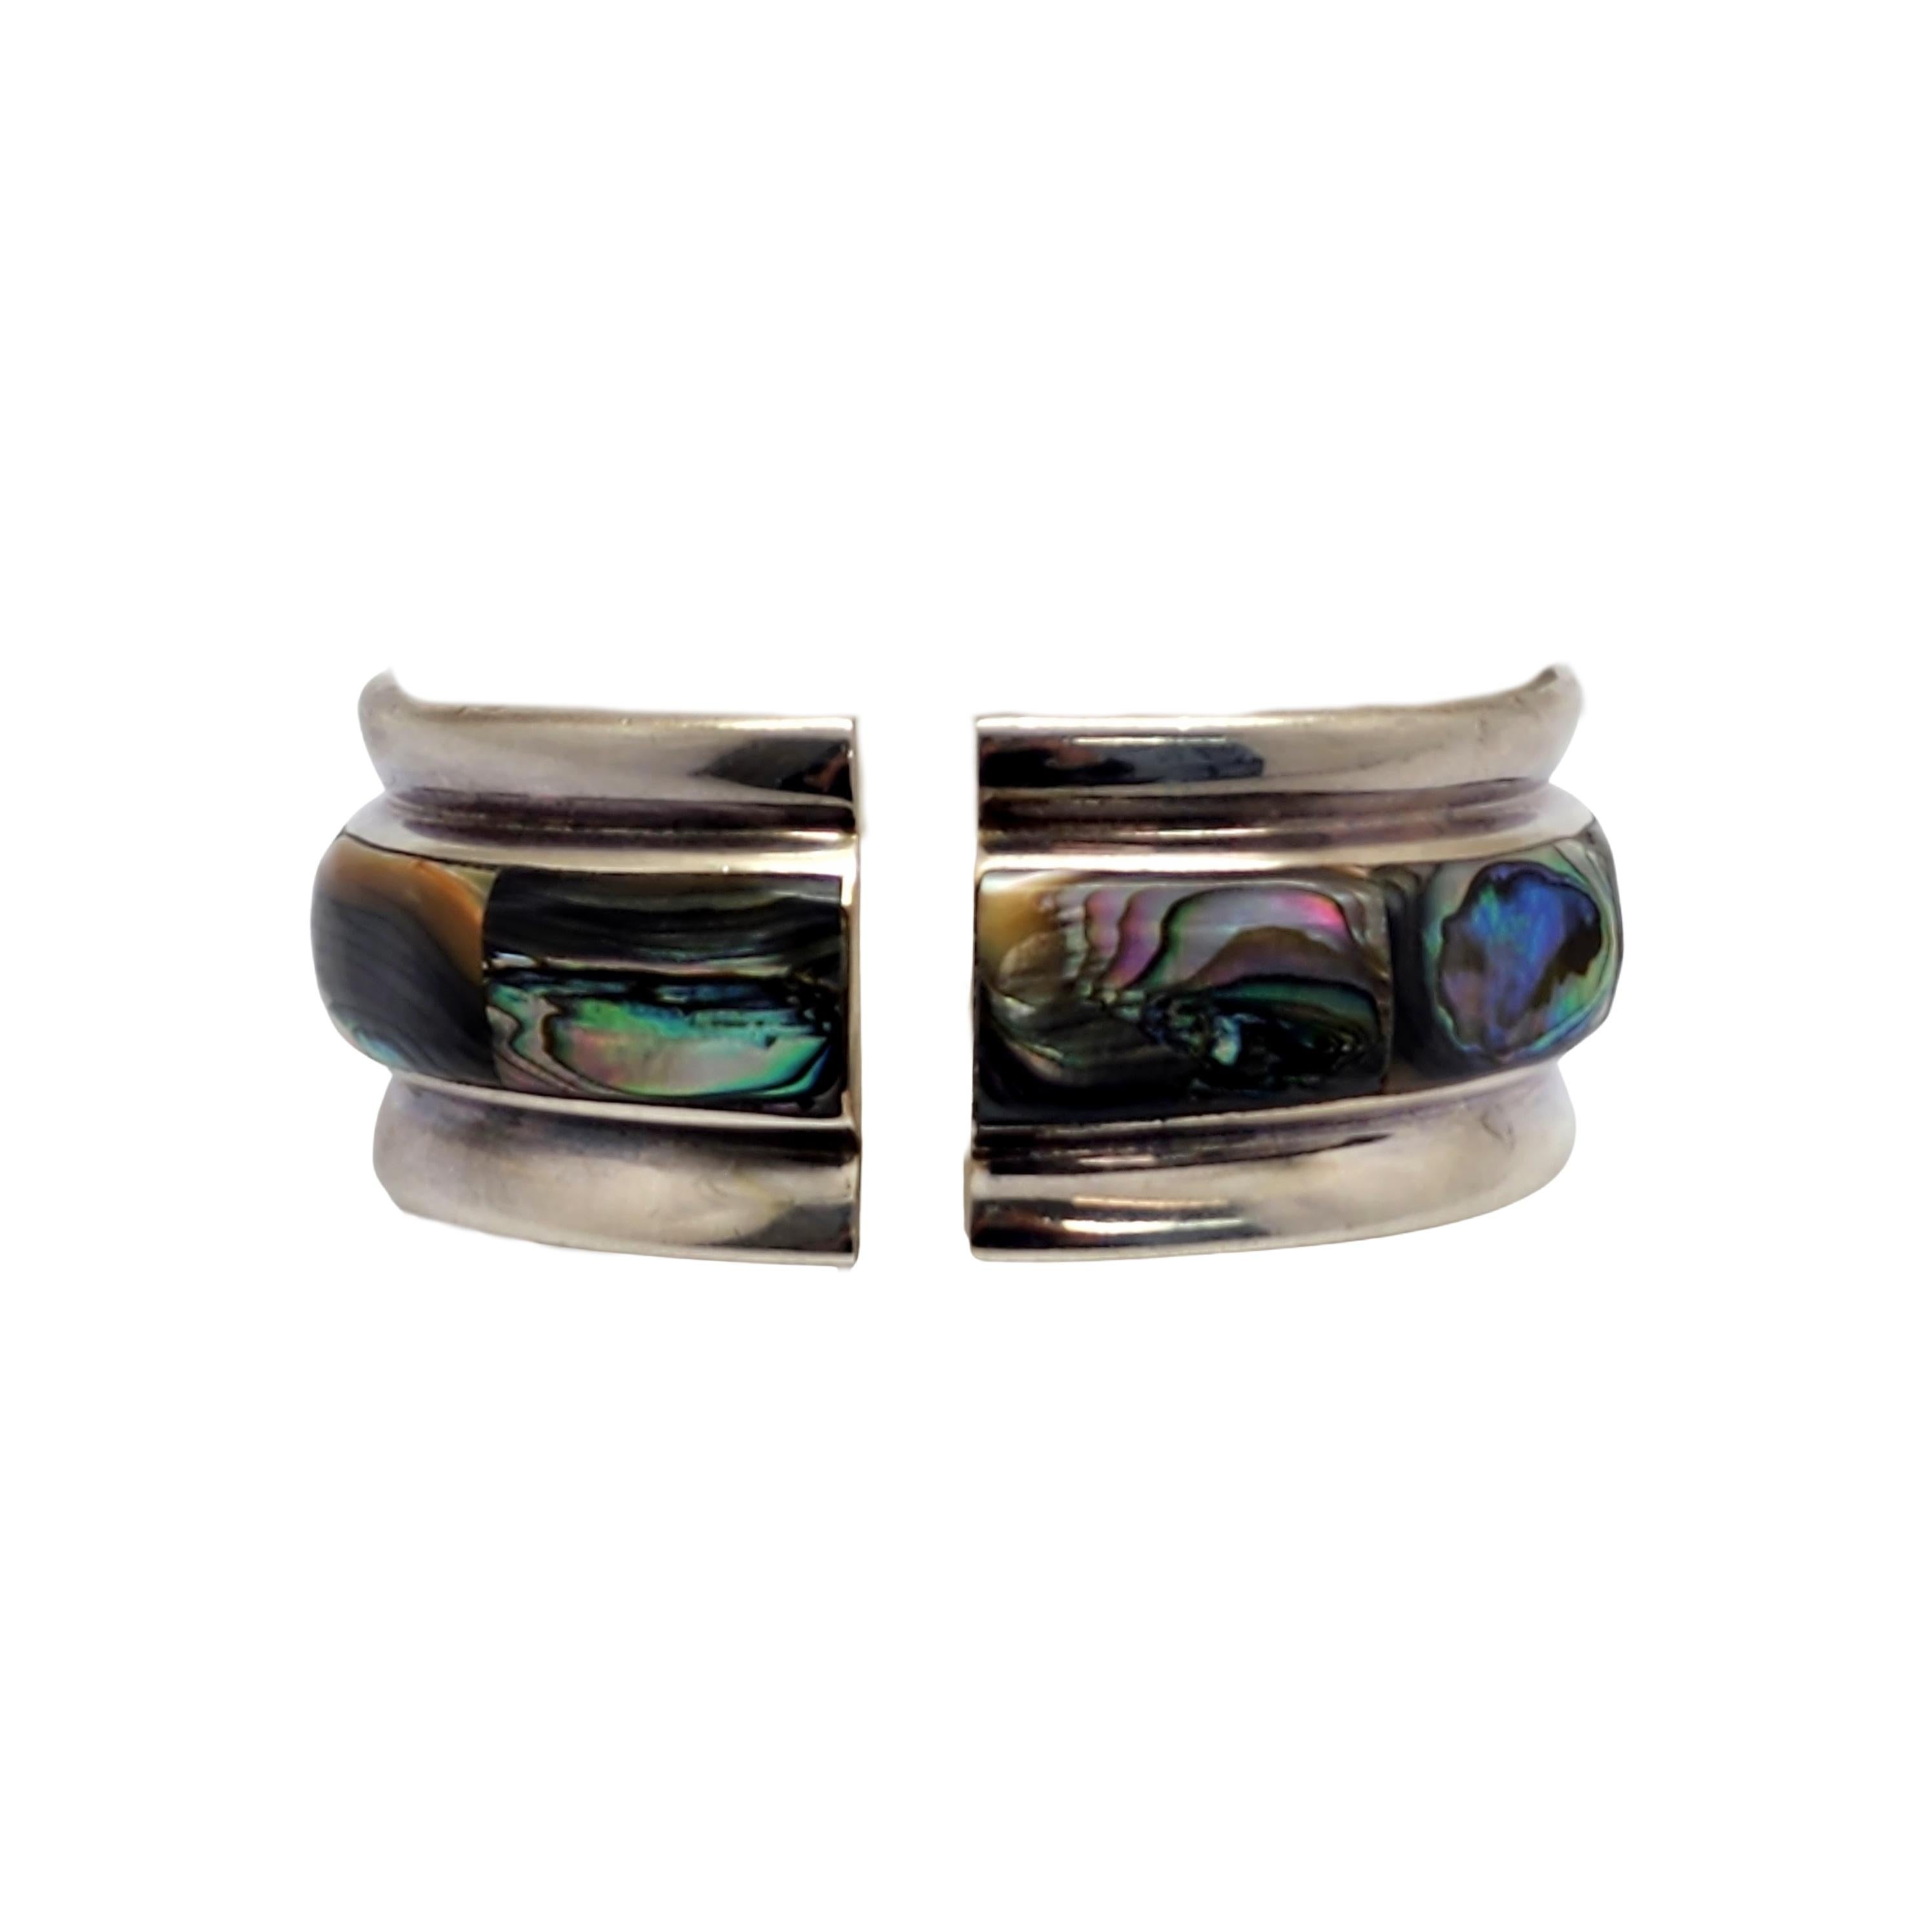 Women's Taxco Mexico TA-164 Sterling Silver Abalone Wide Hinged Bangle Bracelet #13379